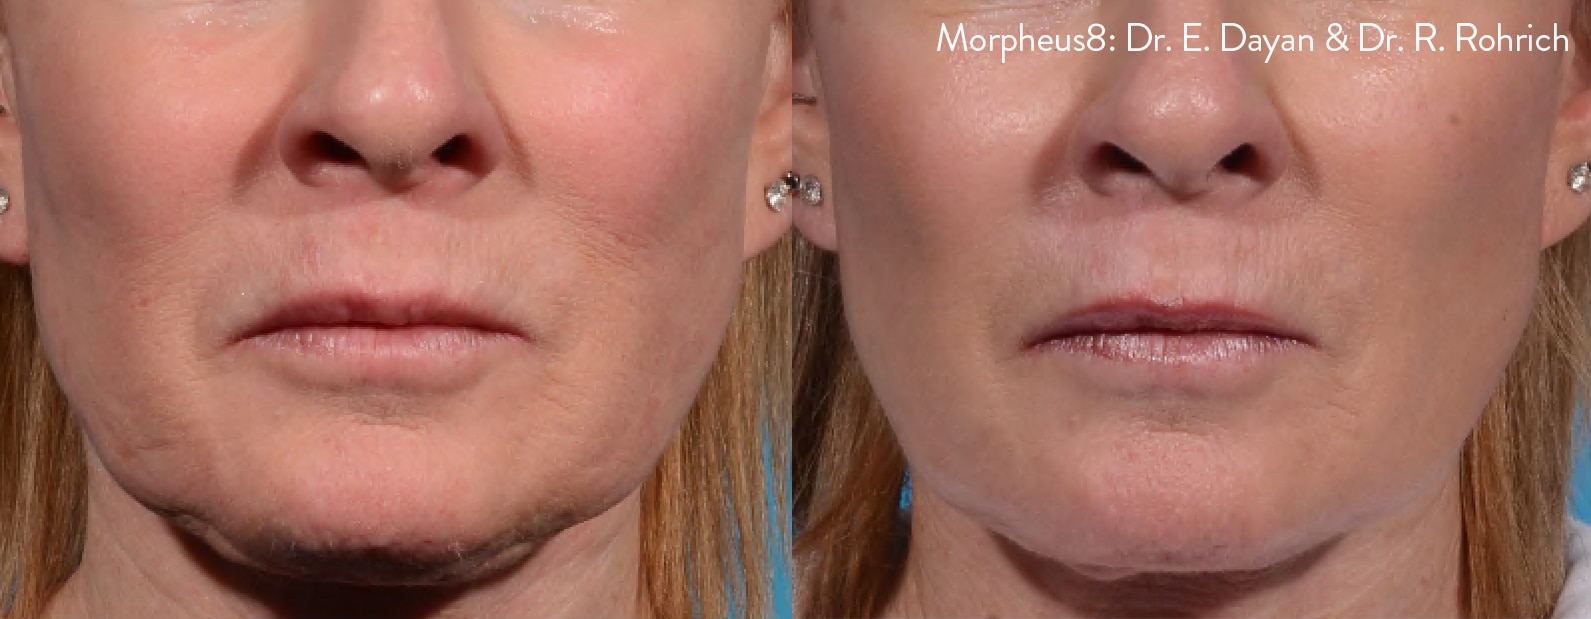 Facial Rejuvenation - Before and After